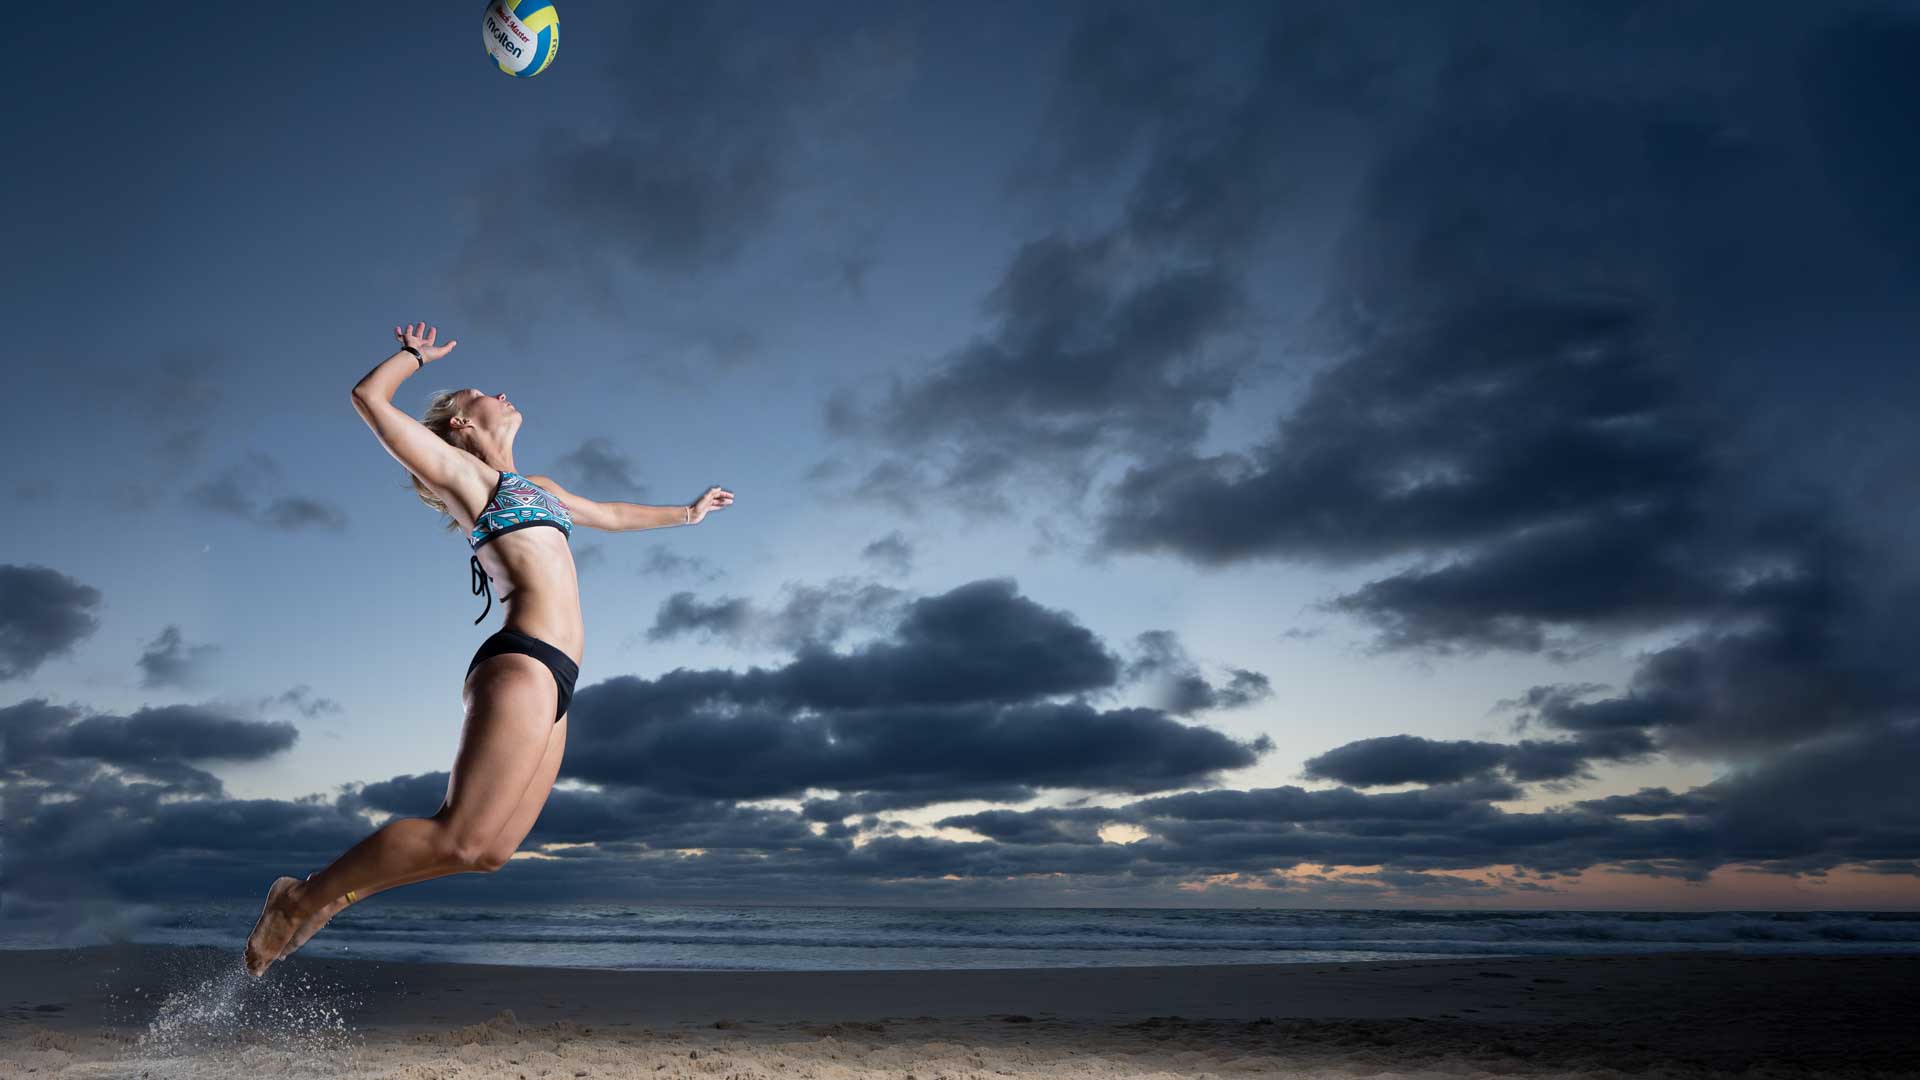 Sports photos of beach volleyball on the stand in France